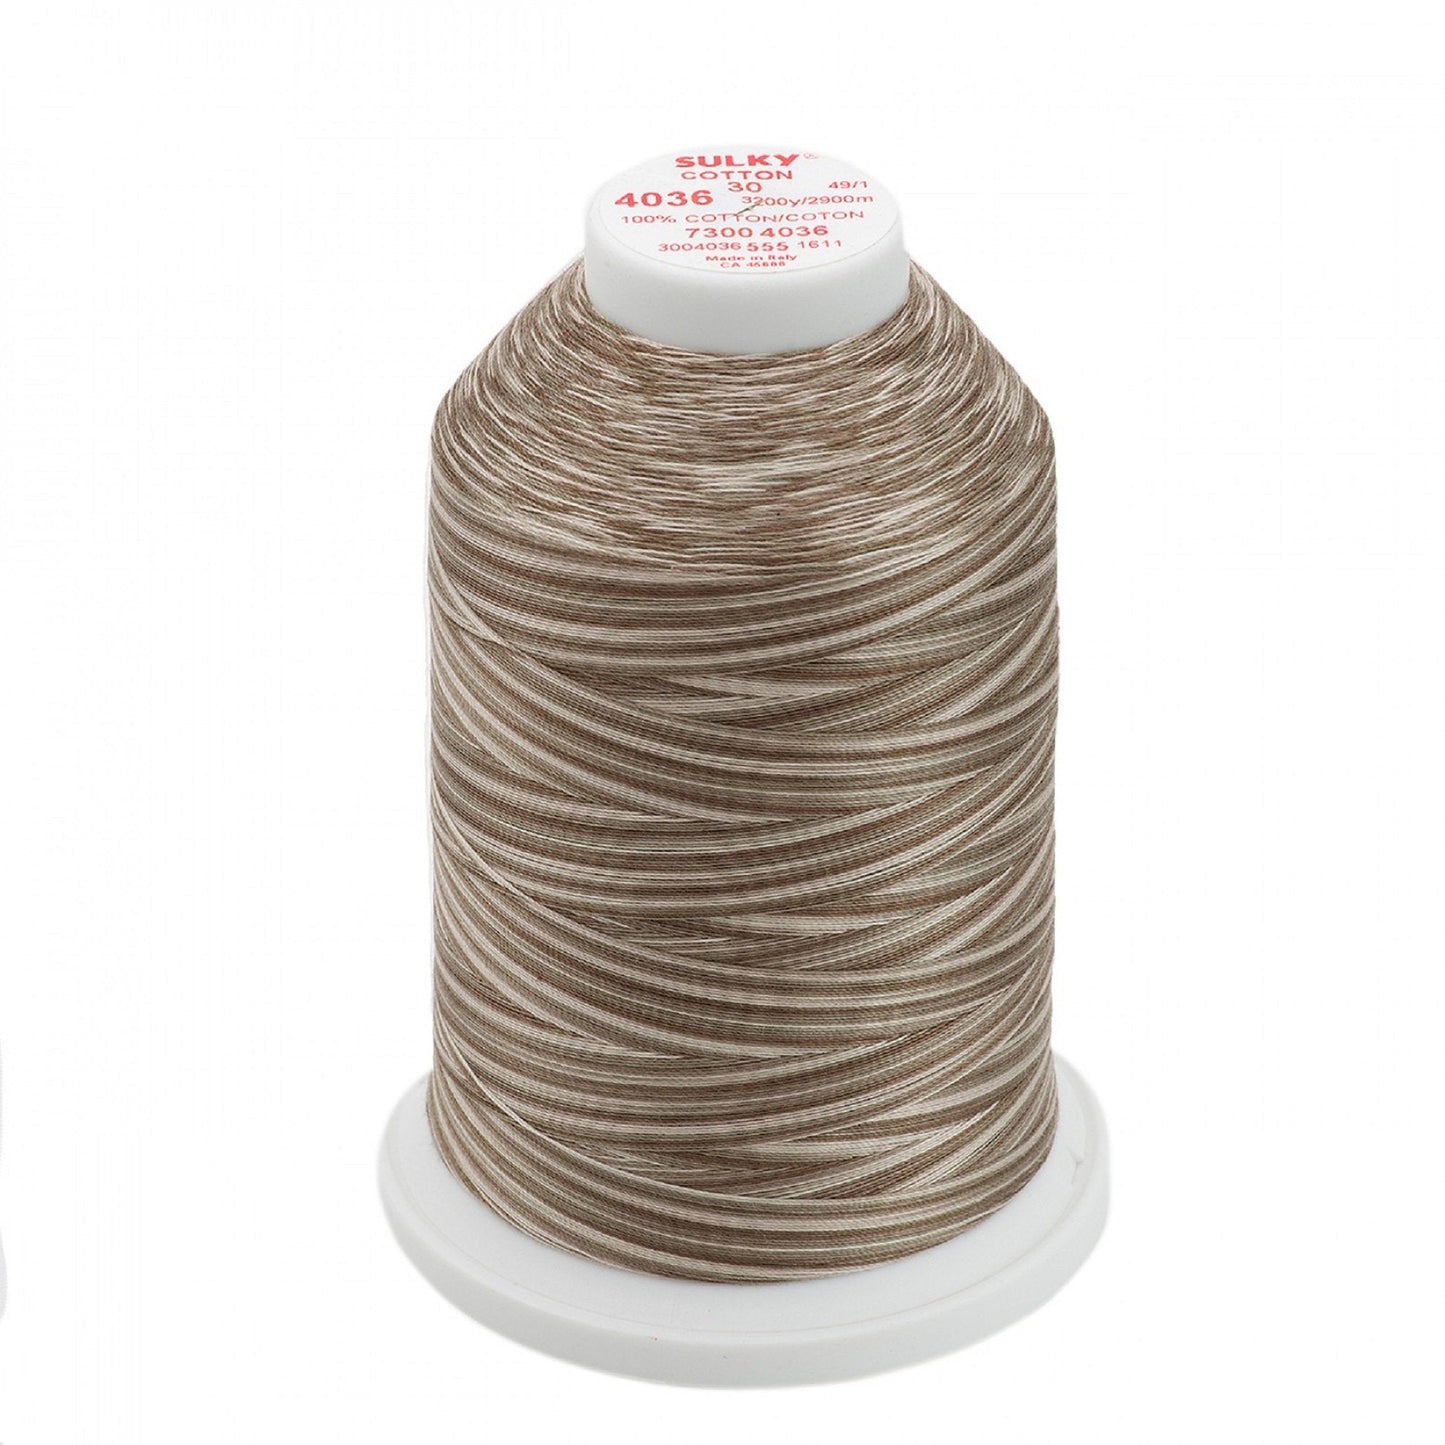 Sulky Cotton 30 Weight "Earth" Variegated Thread-3,200 Yards